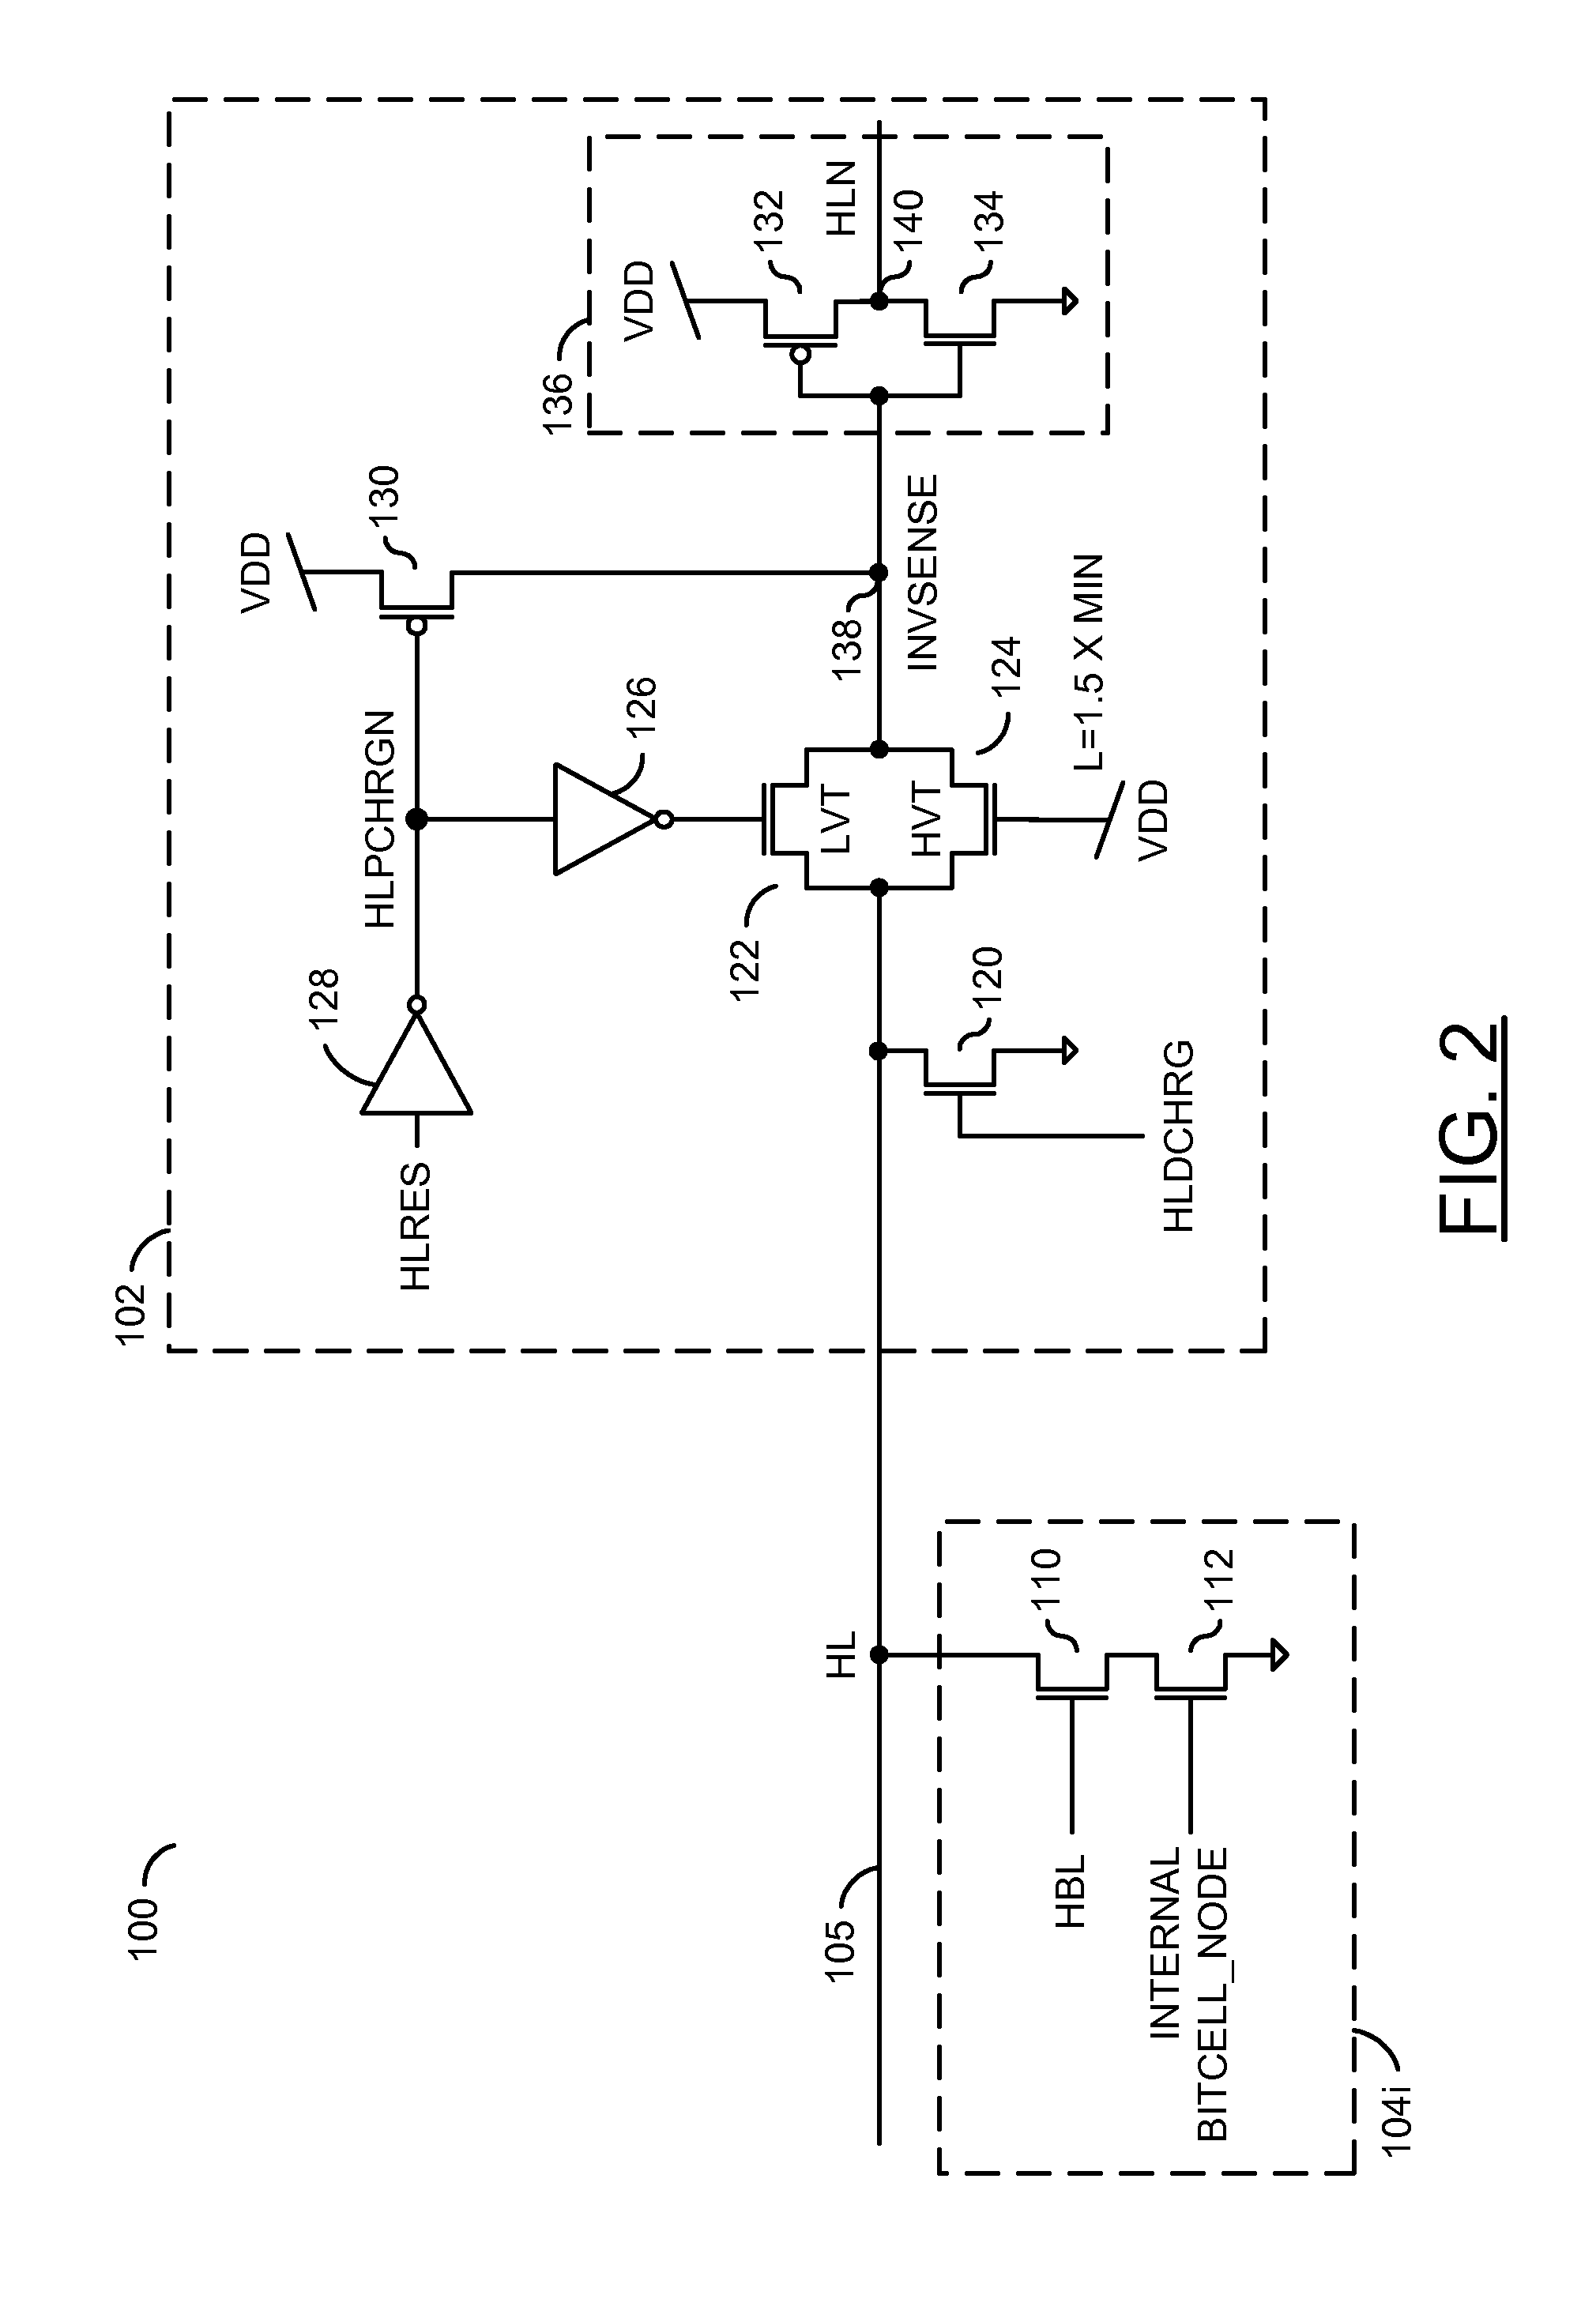 Low power content addressable memory hitline precharge and sensing circuit